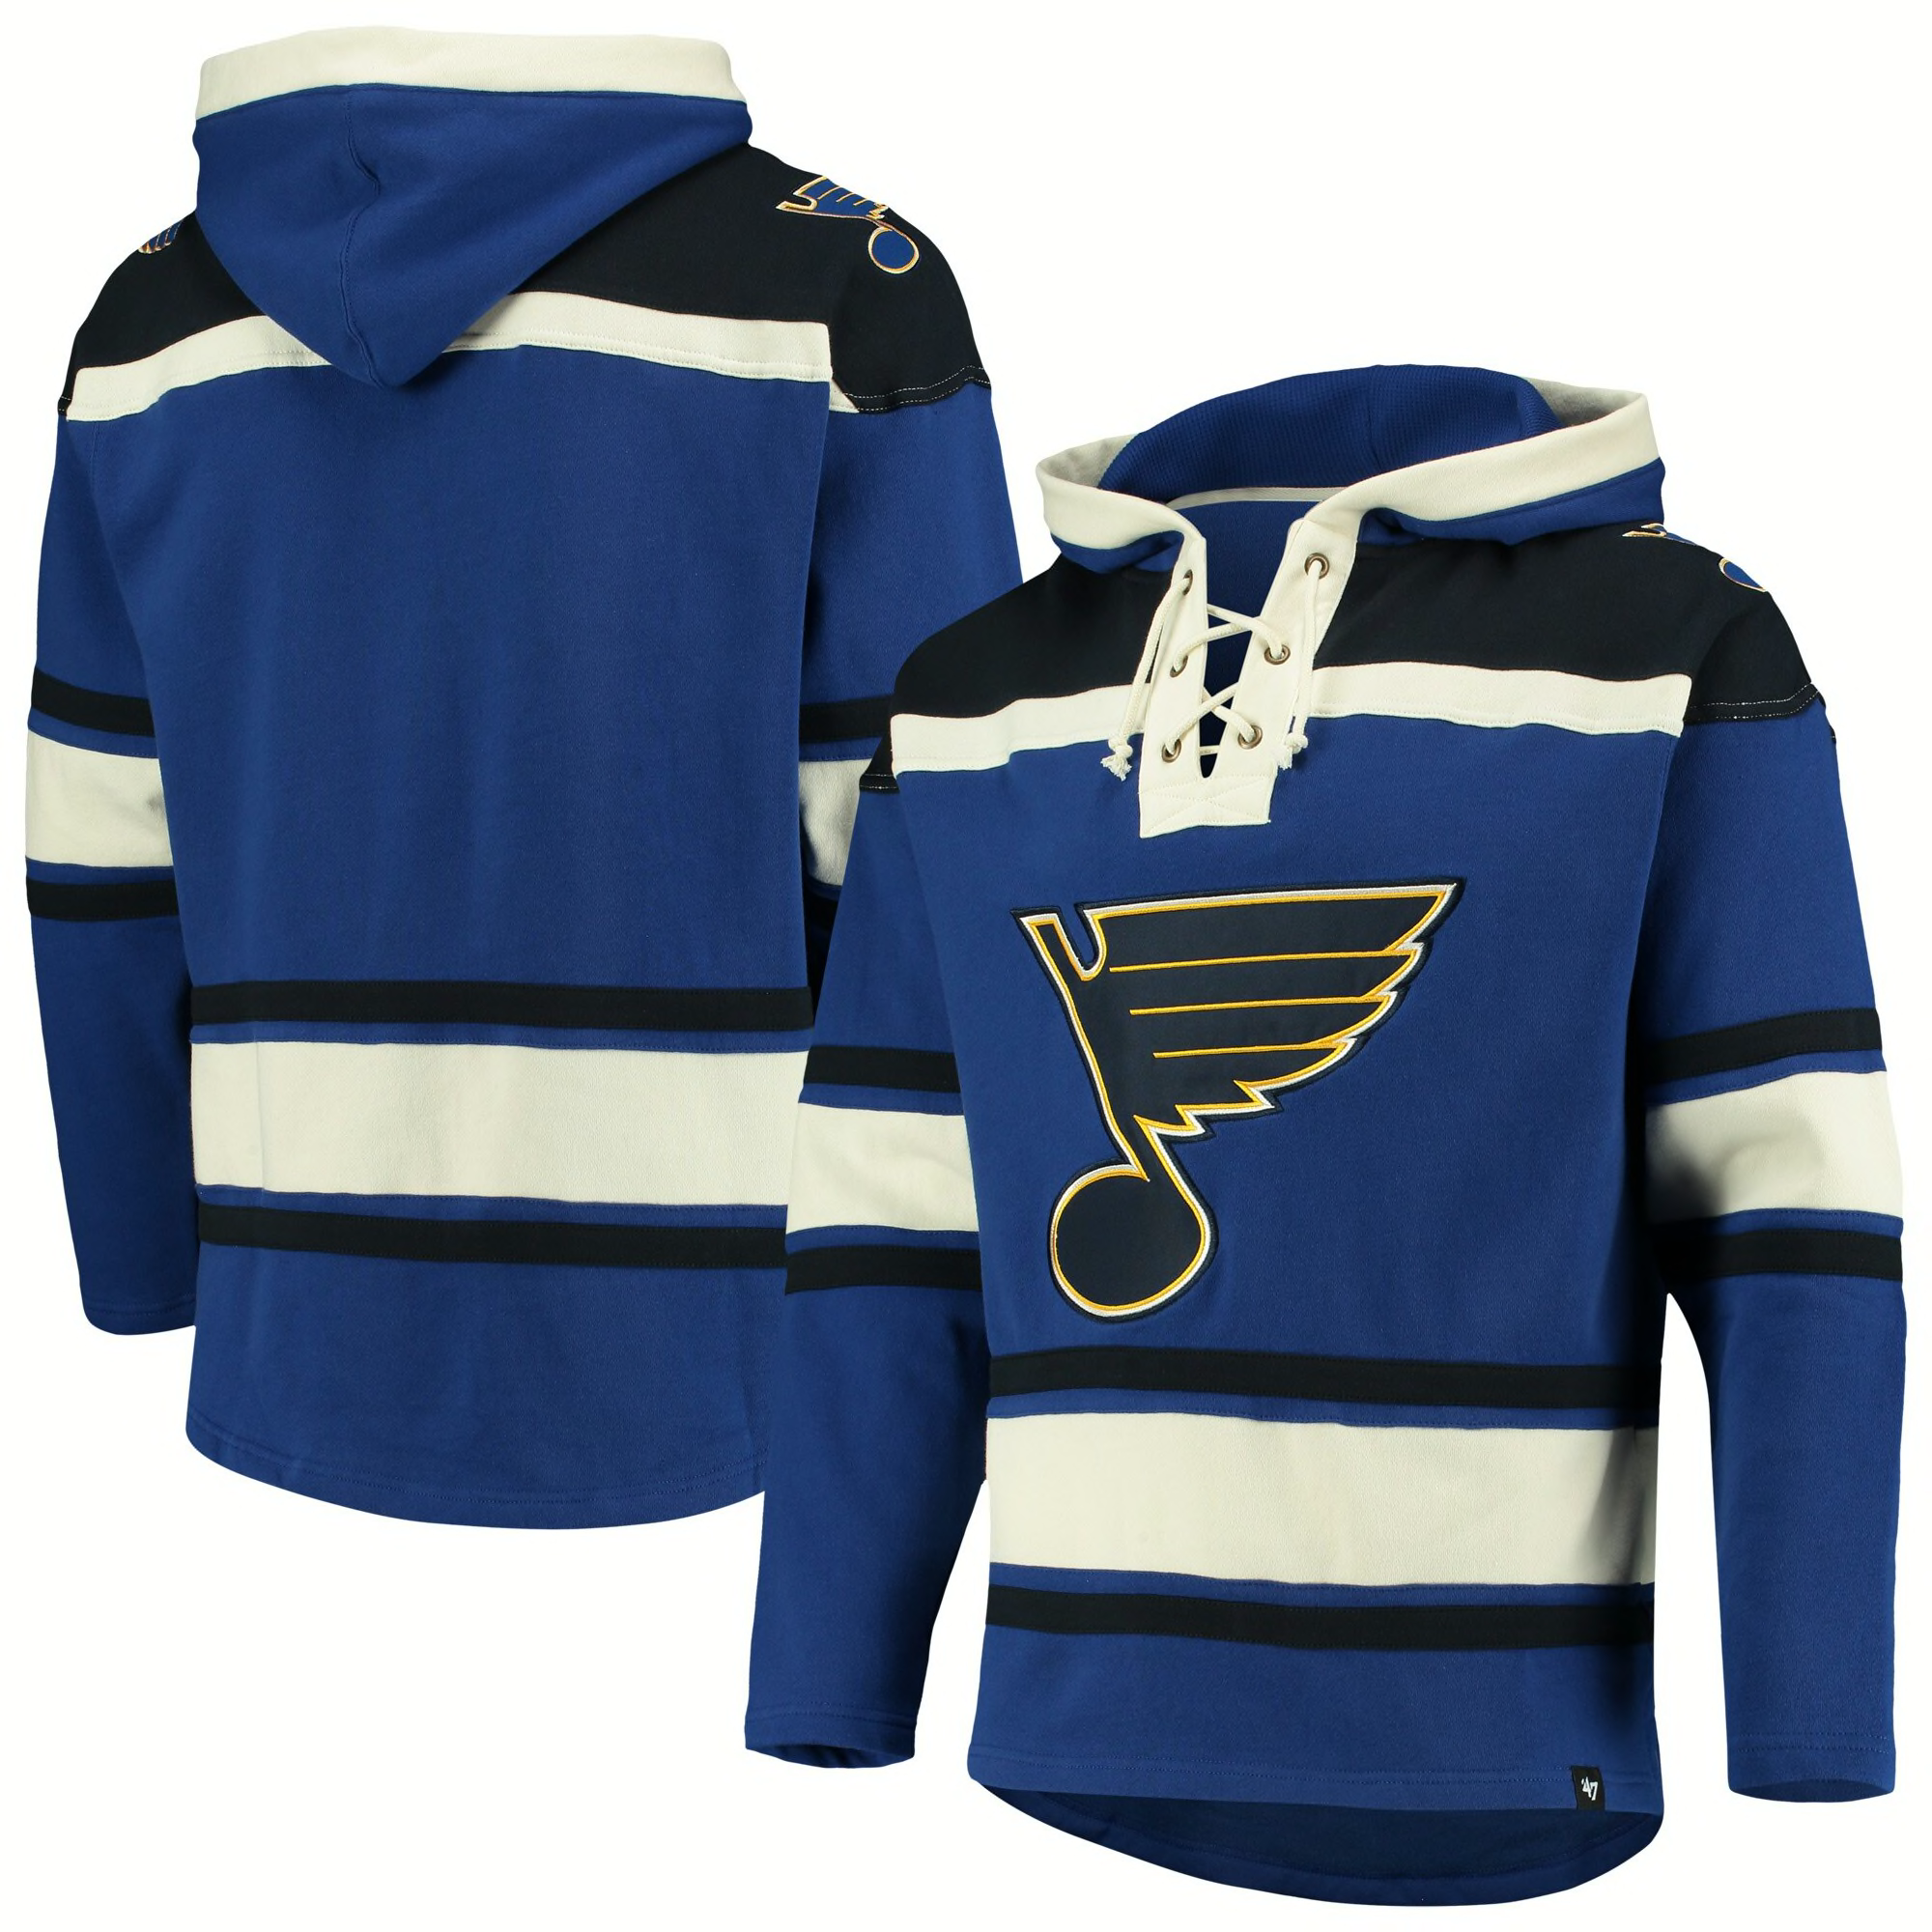 47 Royal St. Louis Blues Superior Lacer Pullover Hoodie